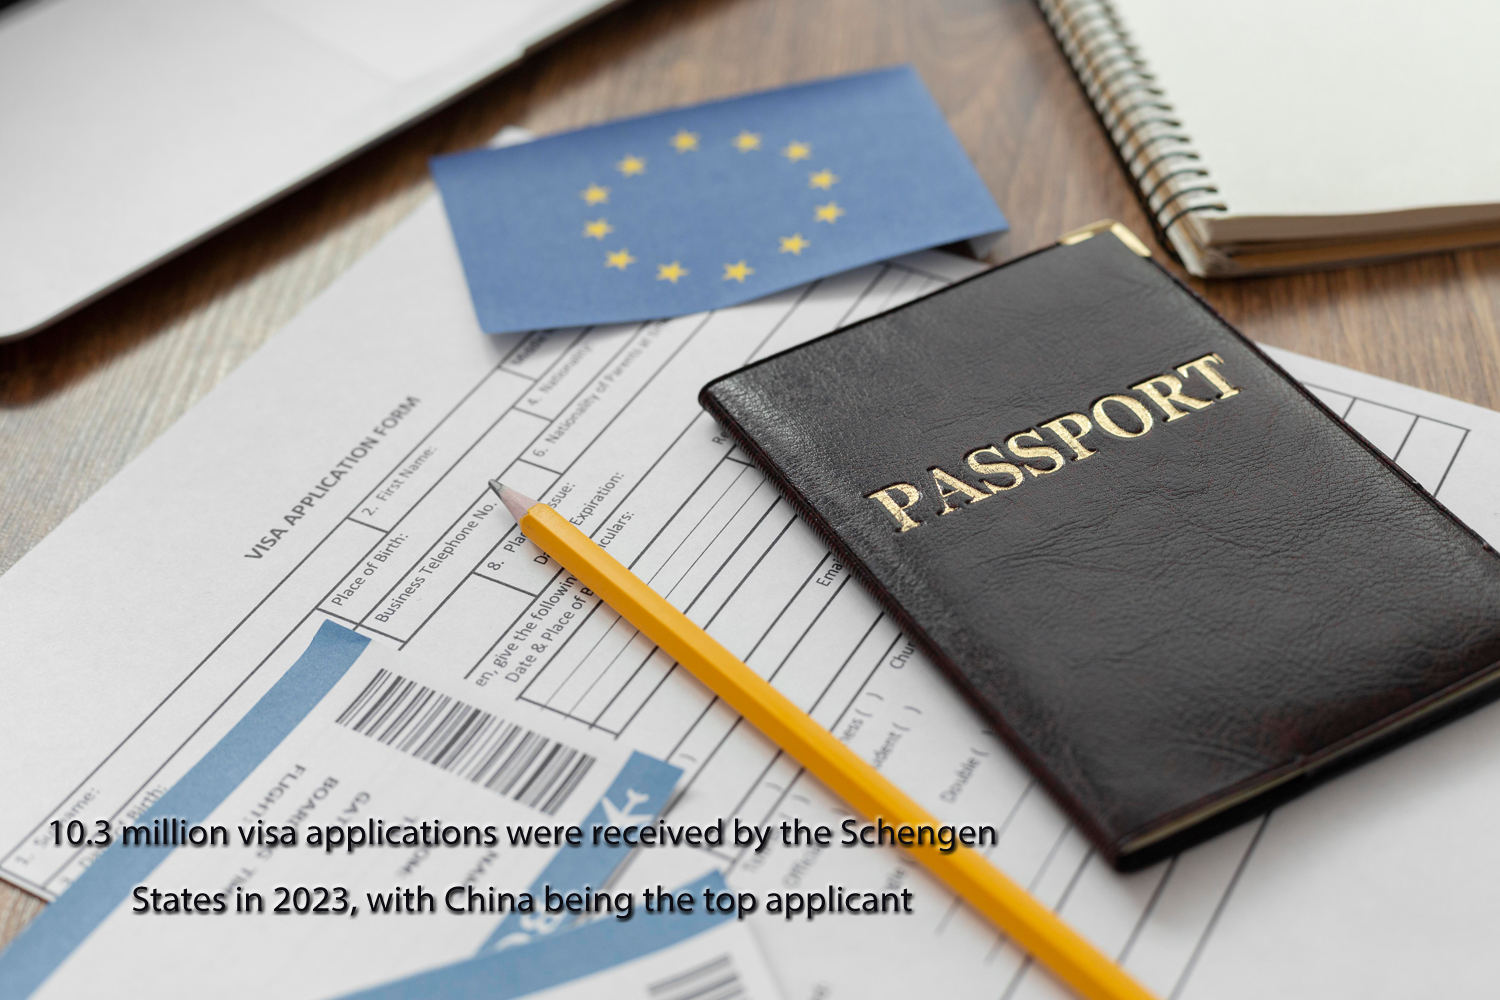 10.3 million visa applications were received by the Schengen States in 2023, with China being the top applicant.